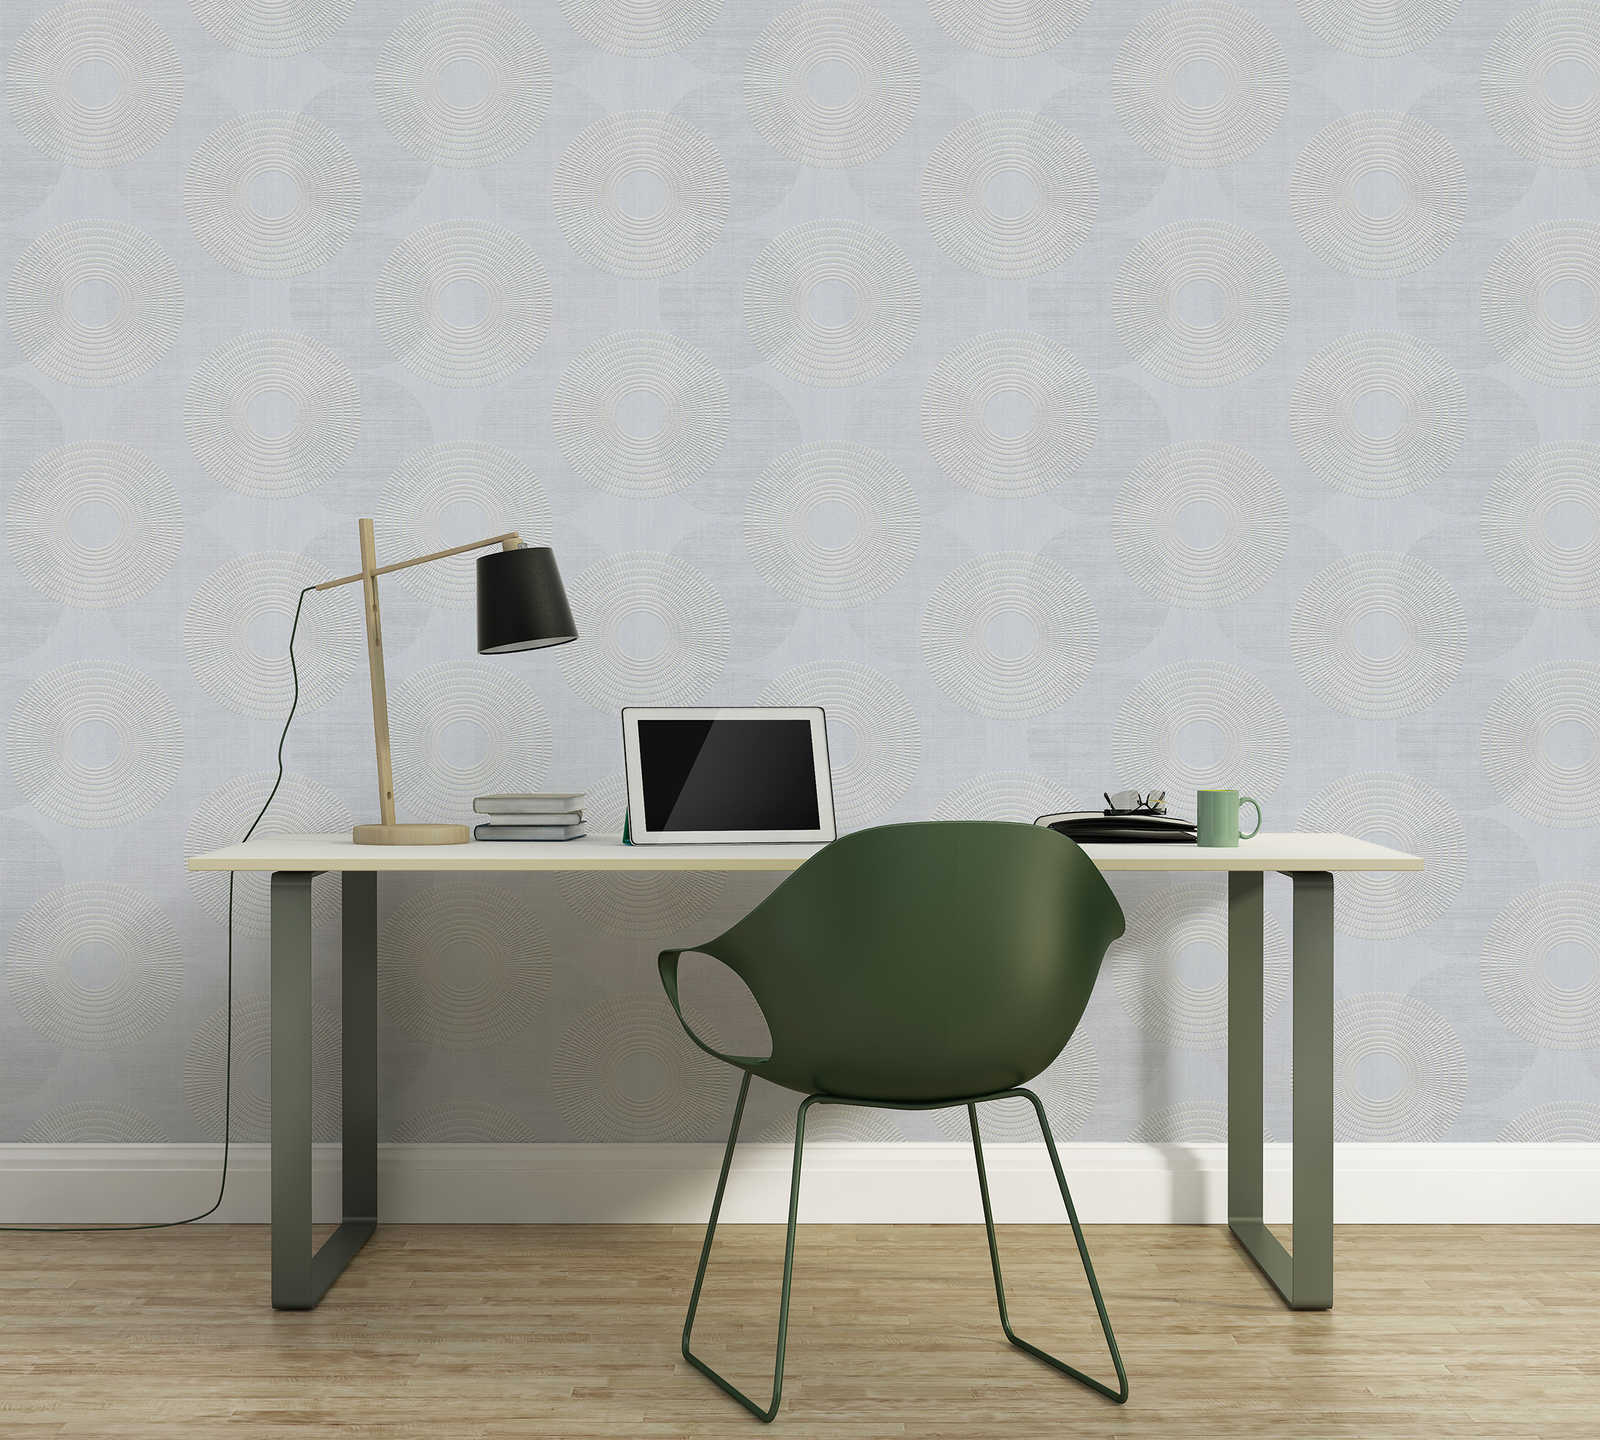             Non-woven wallpaper with geometric design of circles - grey
        